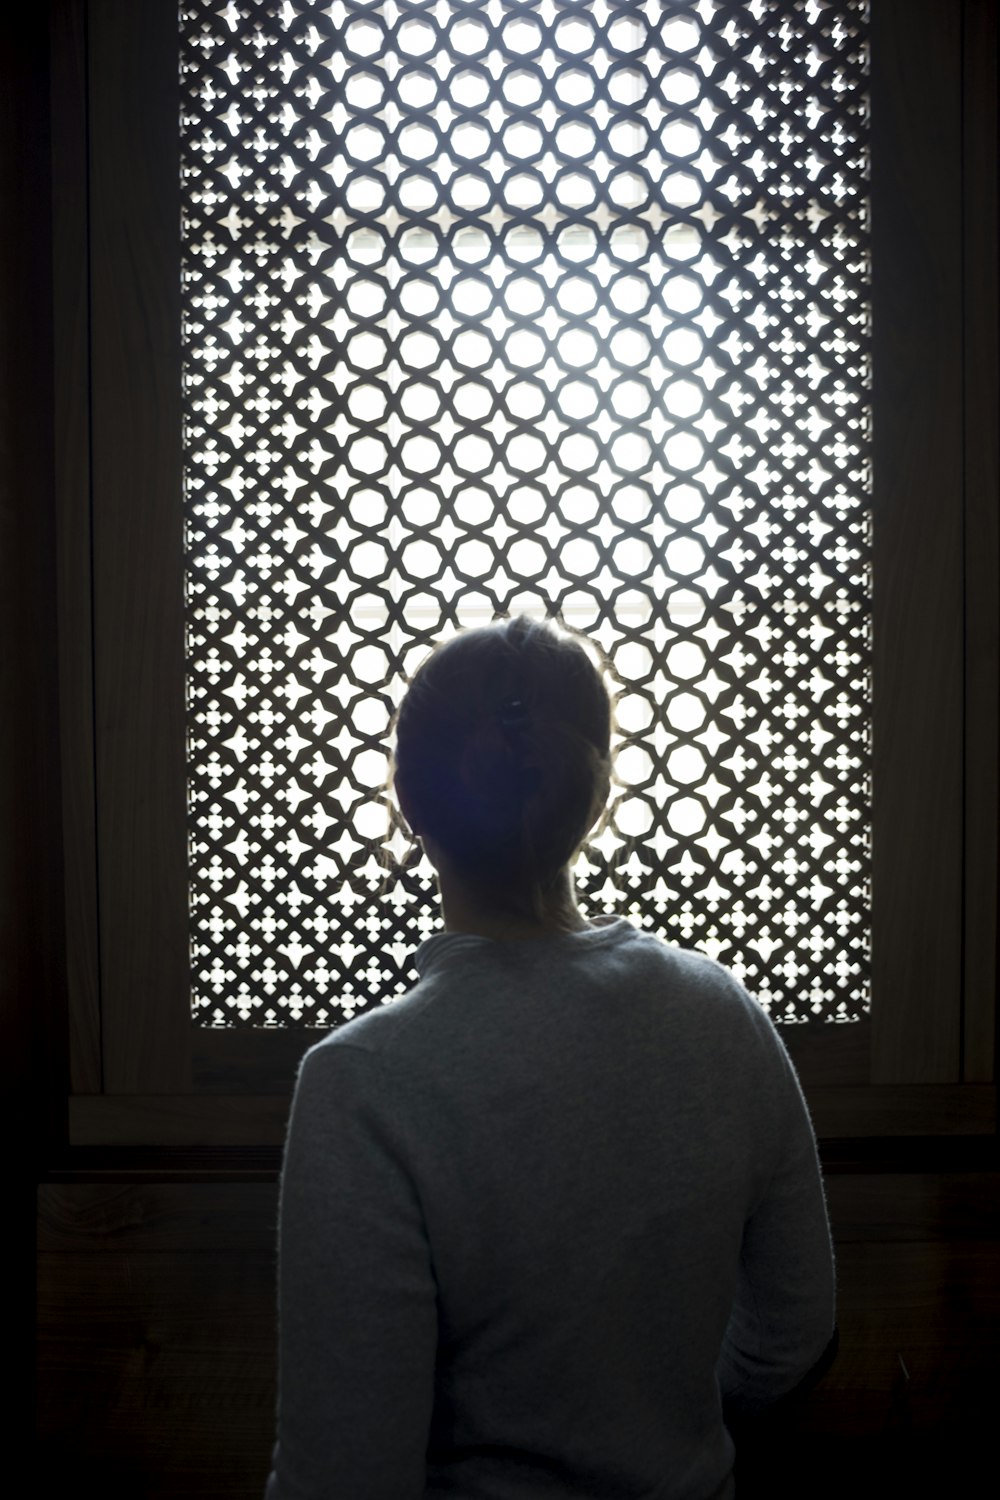 a person standing in front of a window with circles on it